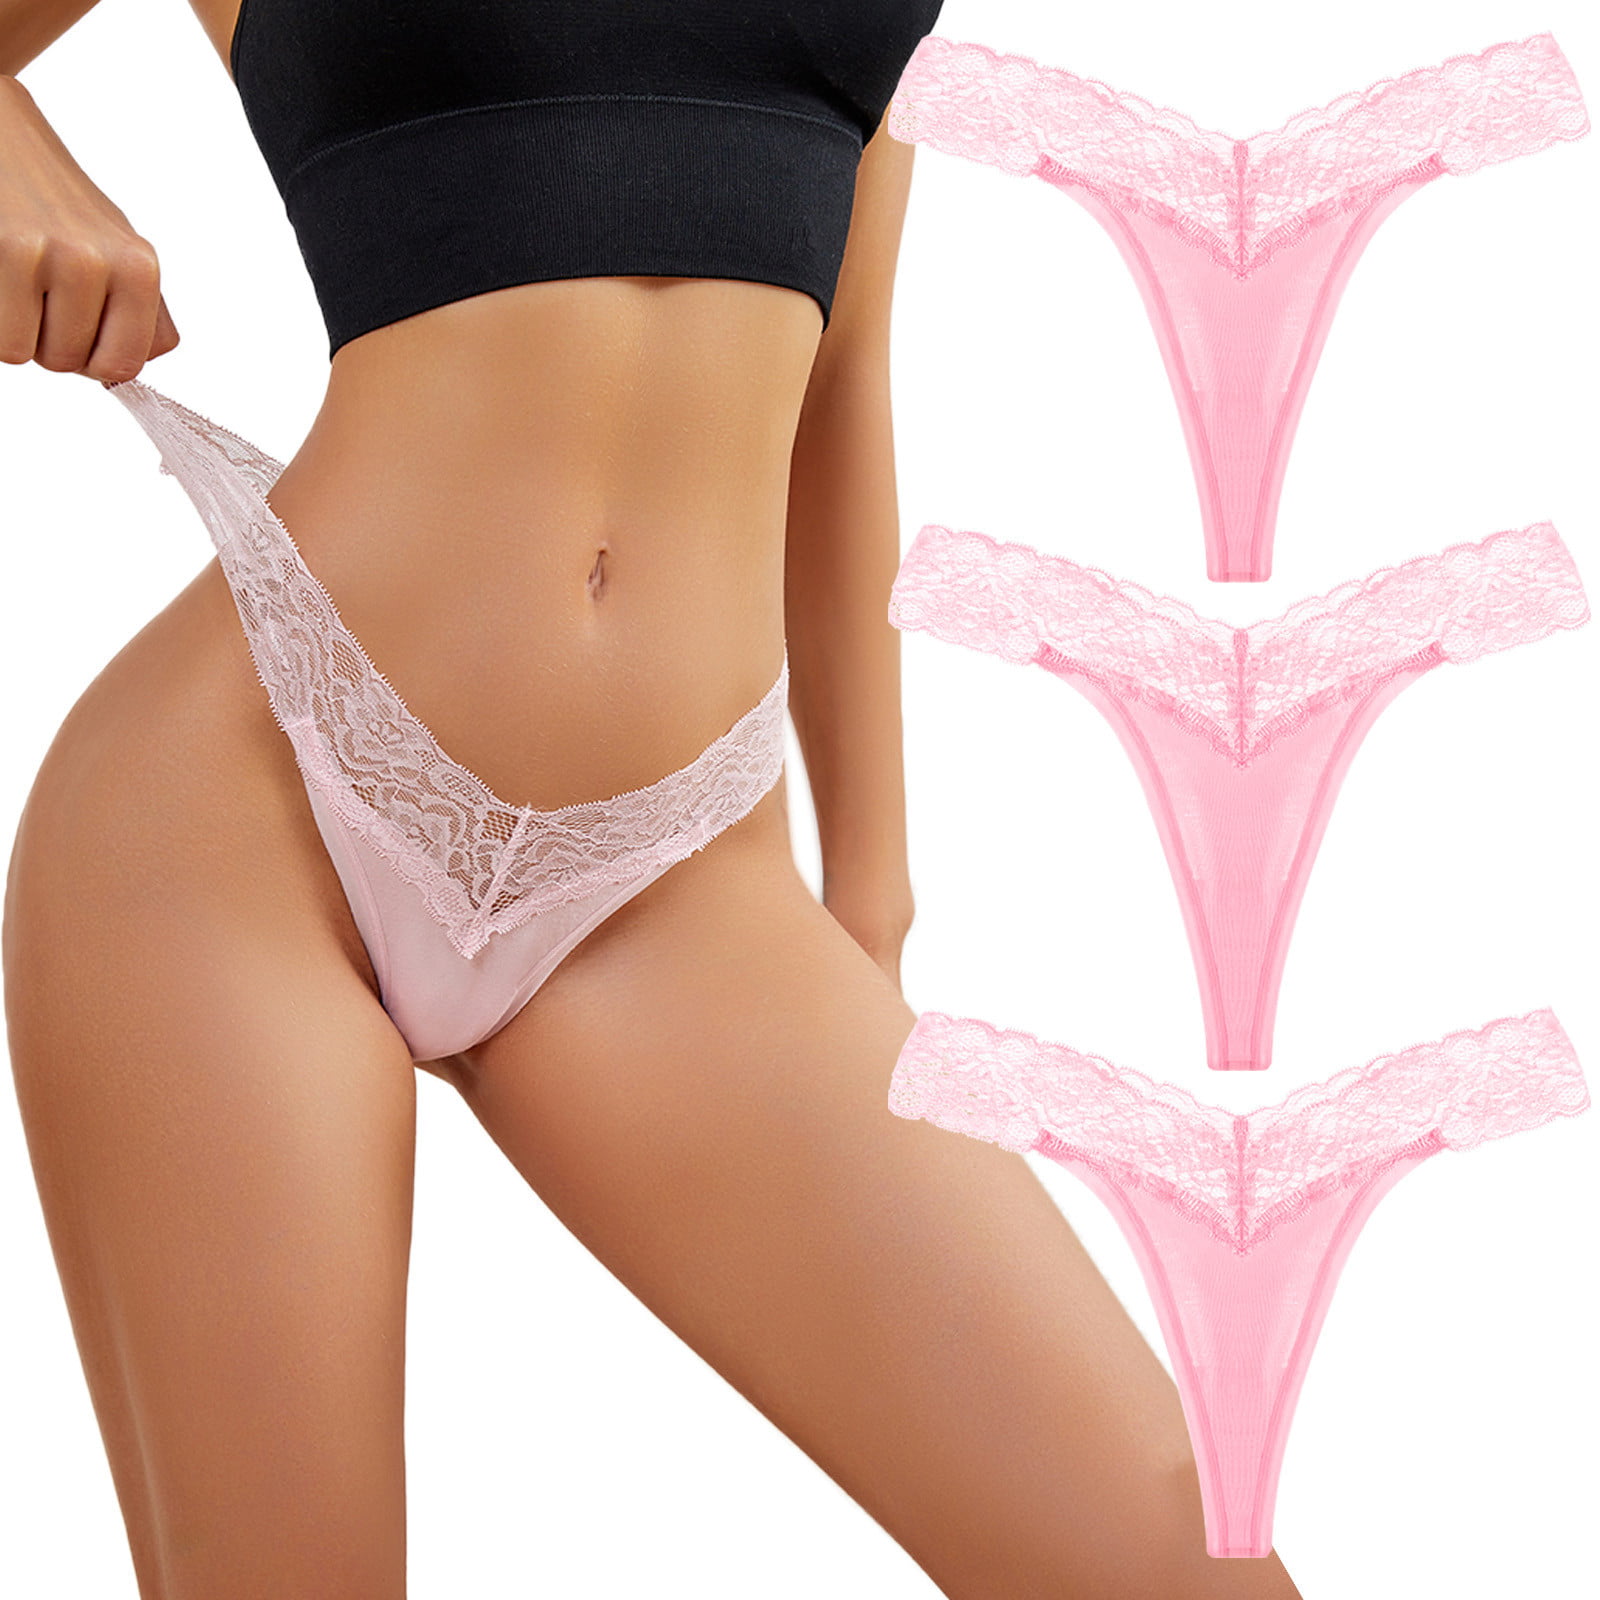 2DXuixsh Seamless Cotton Underwear For Women Bikini Lace Underwear For  Womens Cotton Bikini Panties Soft Hipster Panty Ladies Briefs Light Socks With  Words Polyester White M 